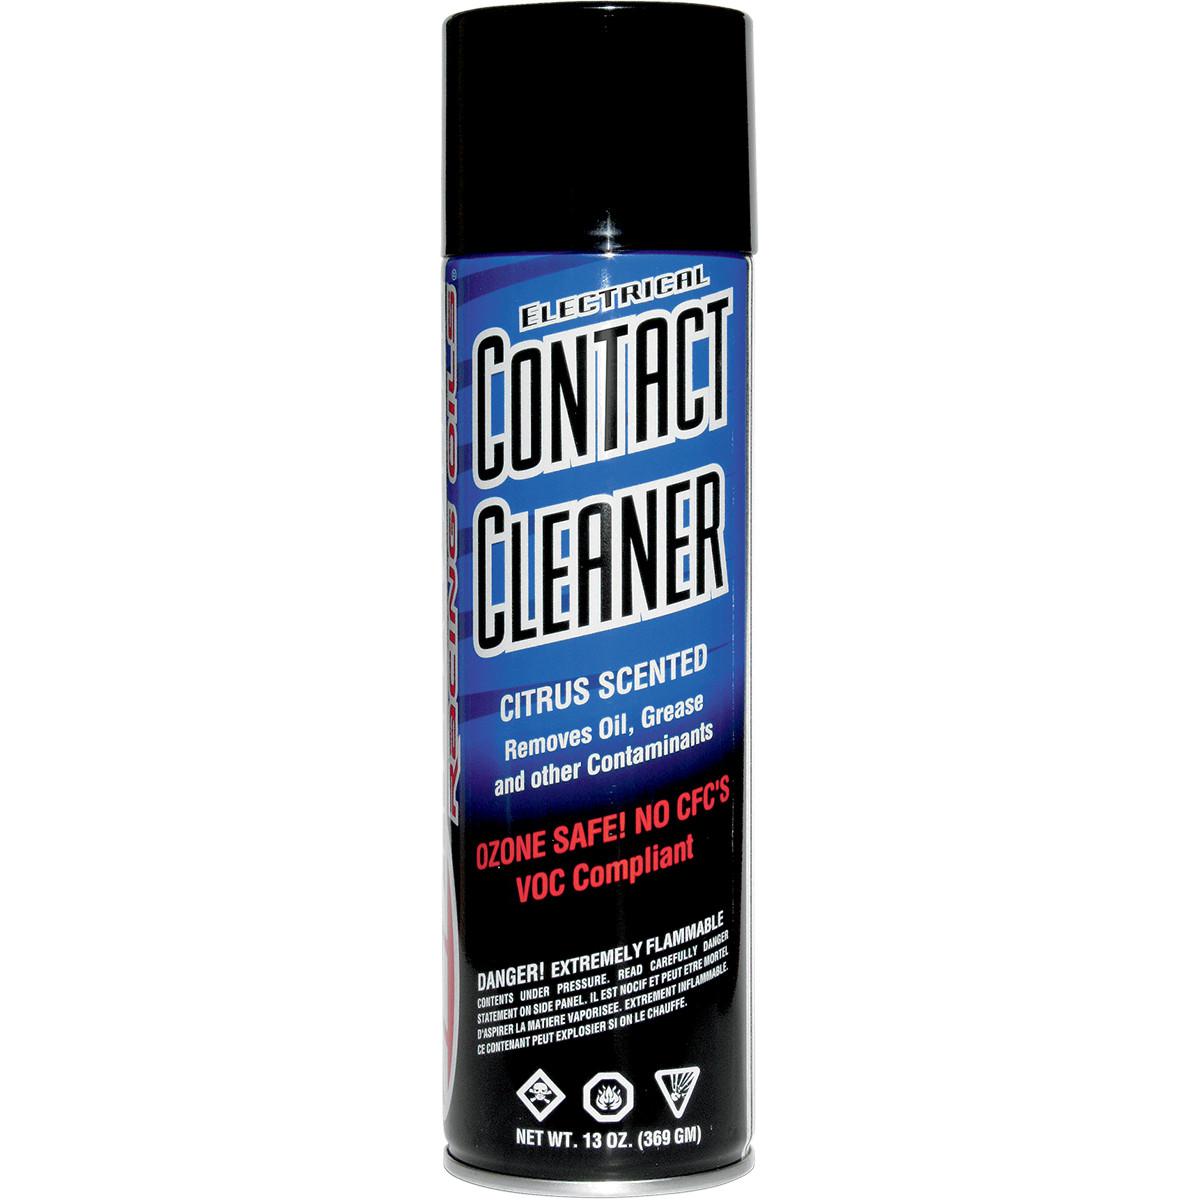 Maxima contact cleaner motorcycle oils/chemicals